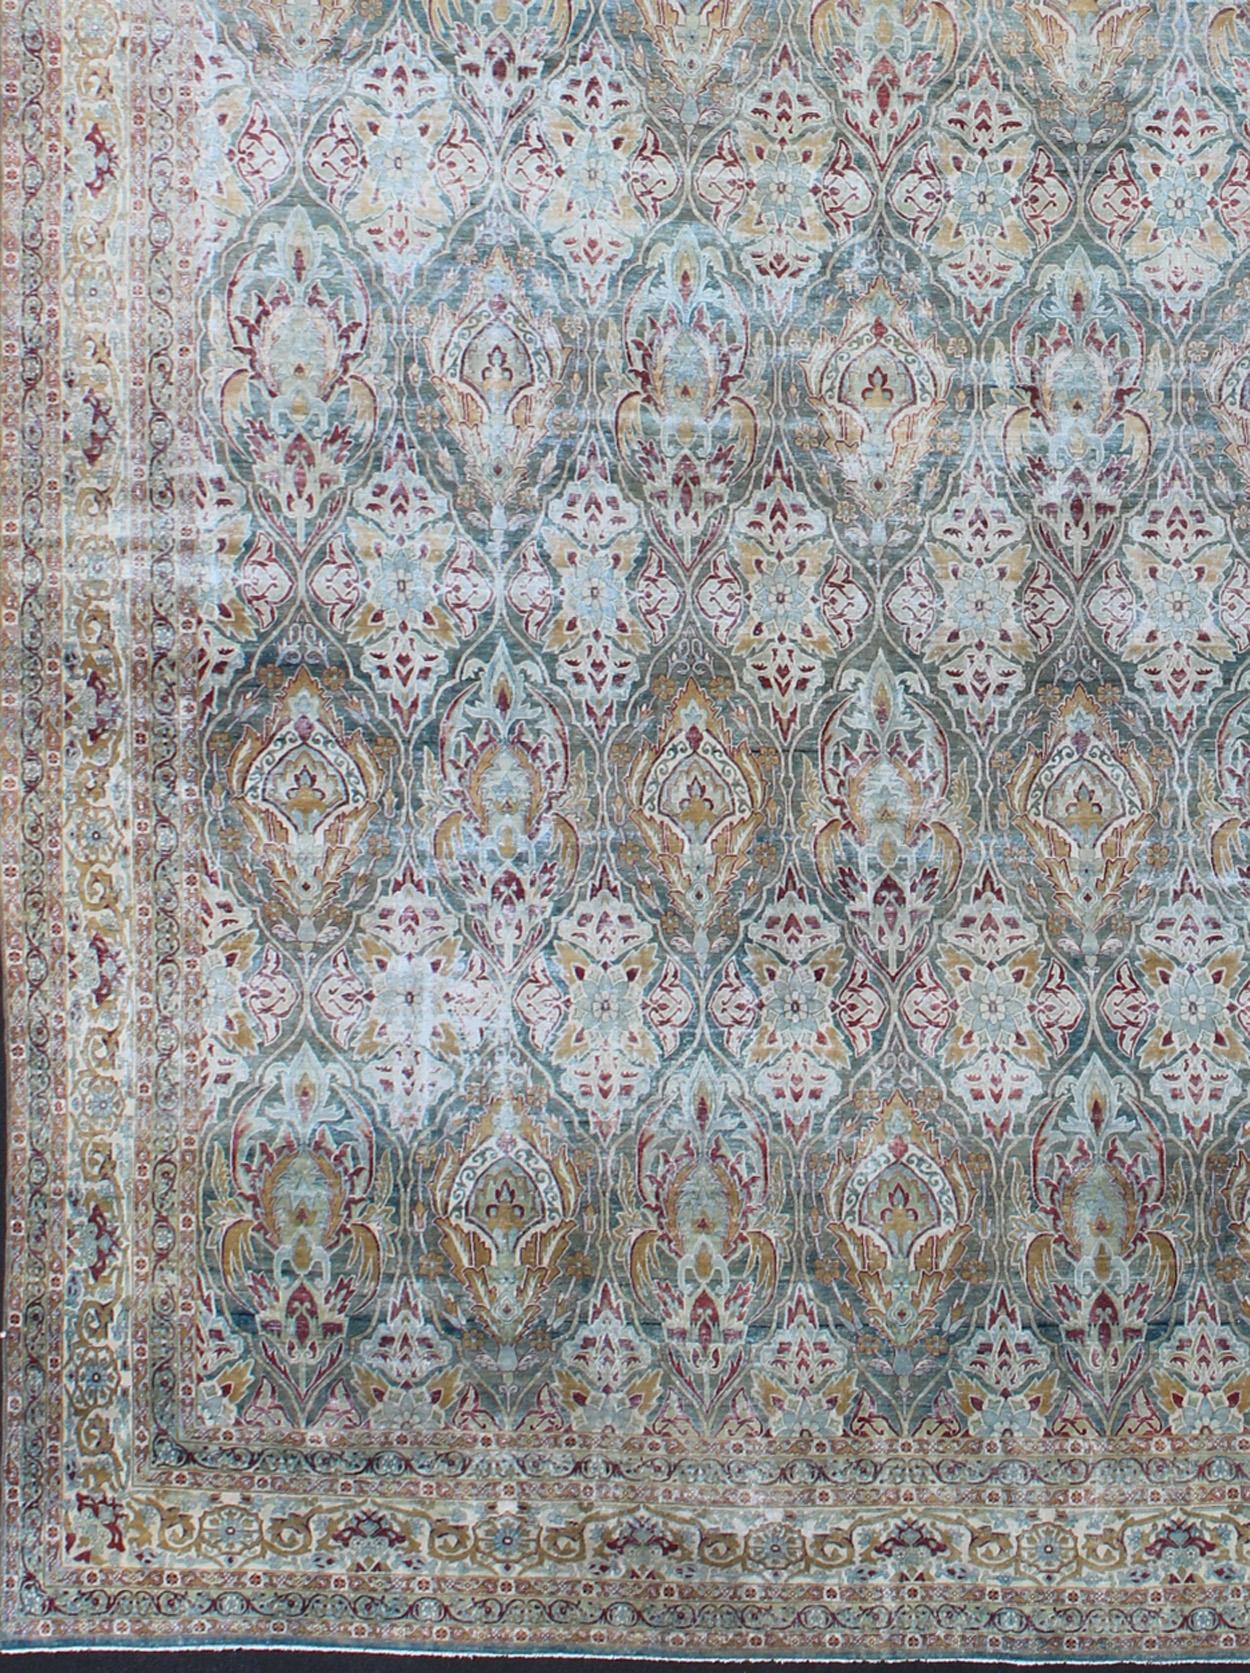 Very Large Antique finely woven Persian Lavar Kerman Rug In Large Scale Design. Large antique Persian Lavar Kerman distressed rug with large scale layered flowers in an all-over design, rug 17-1003, country of origin / type: Iran / Kerman, circa